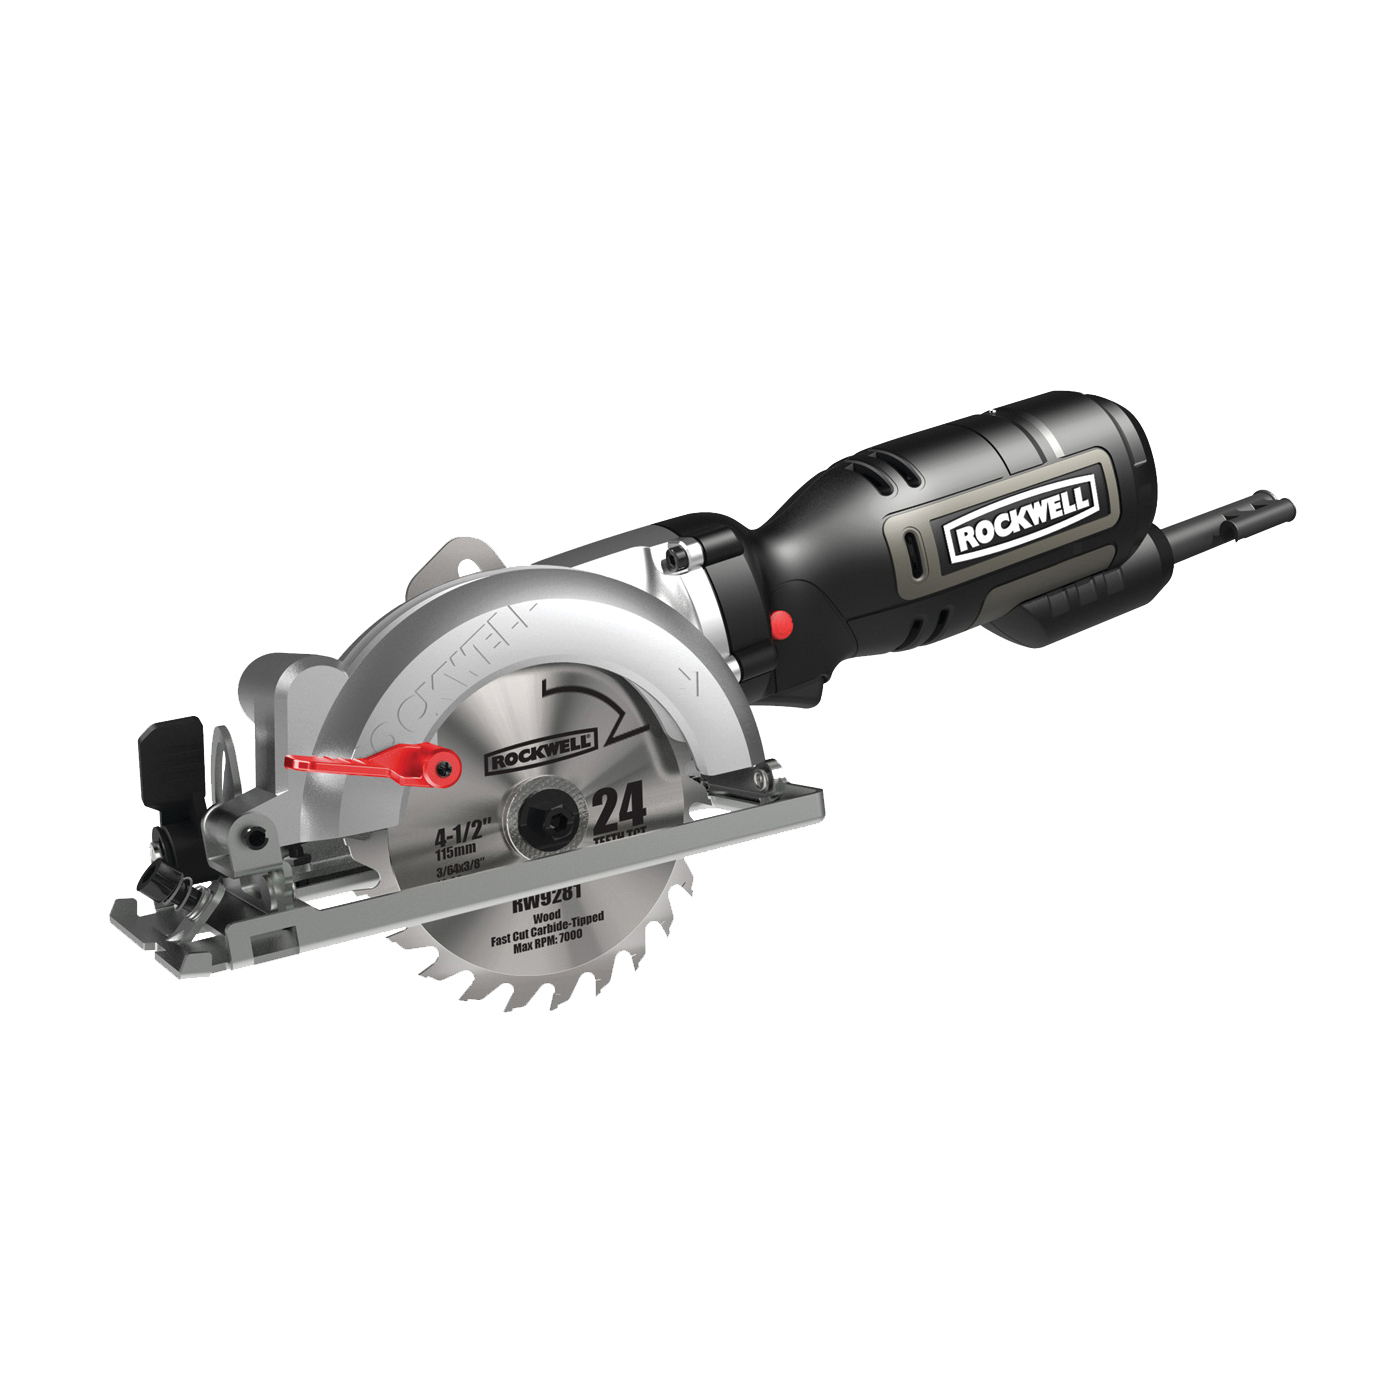 Genesis GCS130 13-Amp 7-1 4-In. Circular Saw with 24T Carbide Tipped Blade, Rip Guide, Blade Wrench, and Year - 2